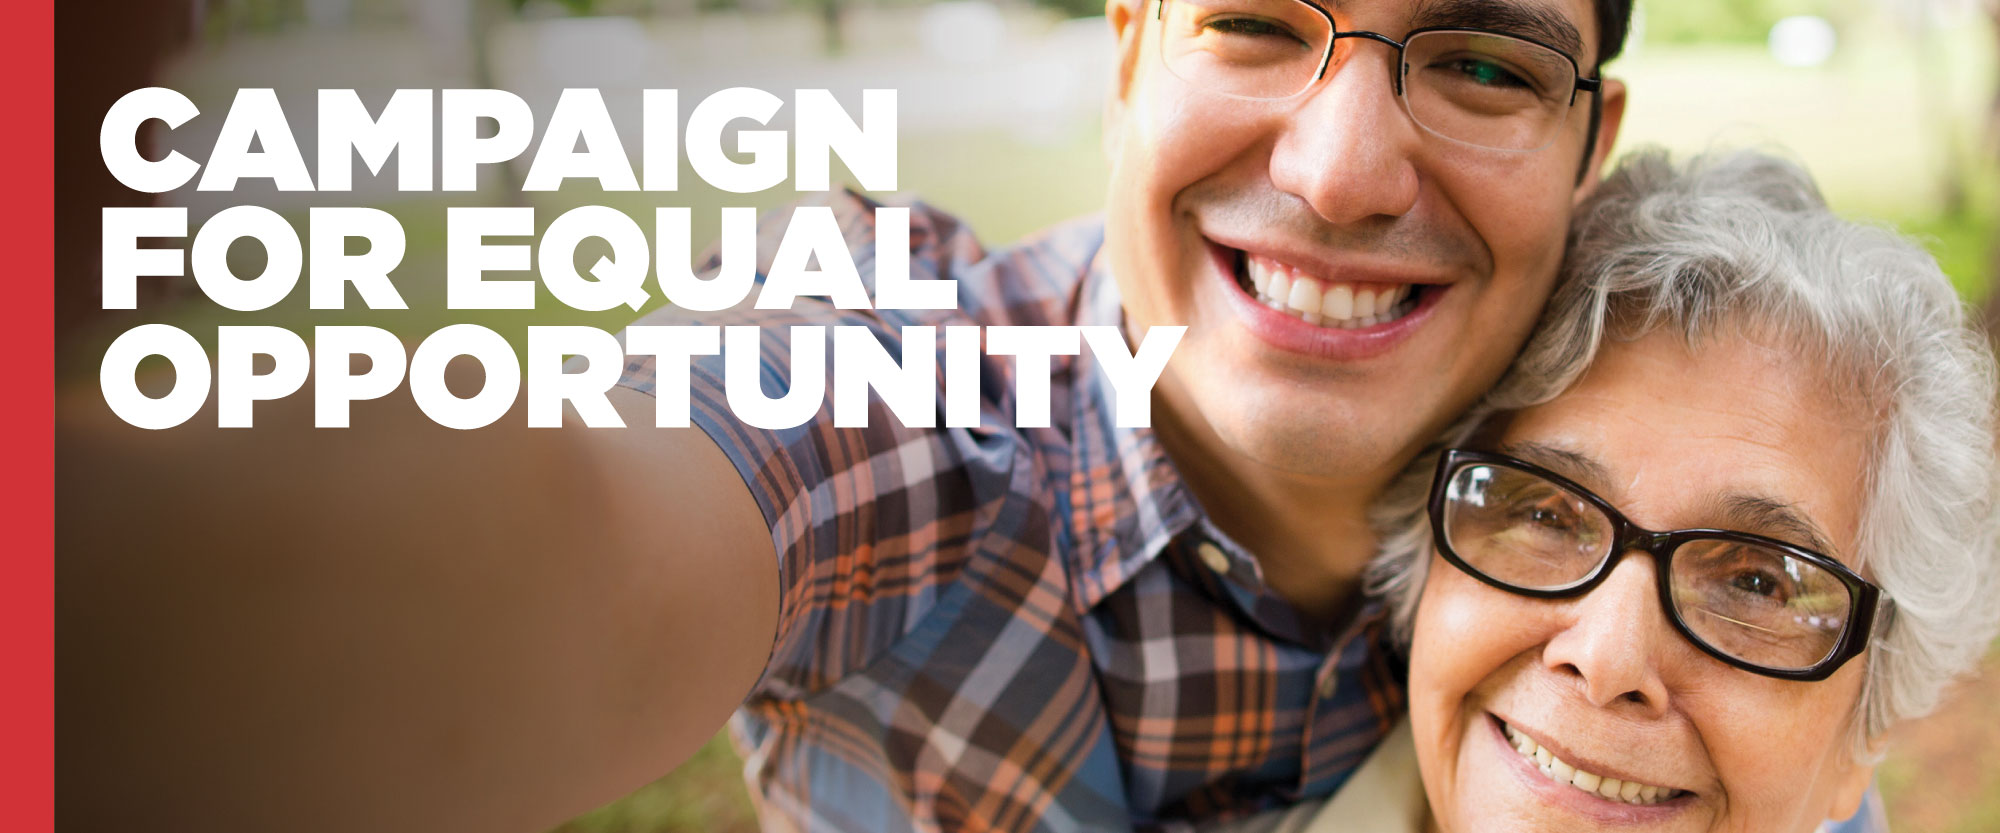 UnidosUS Campaign for Equal Opportunity